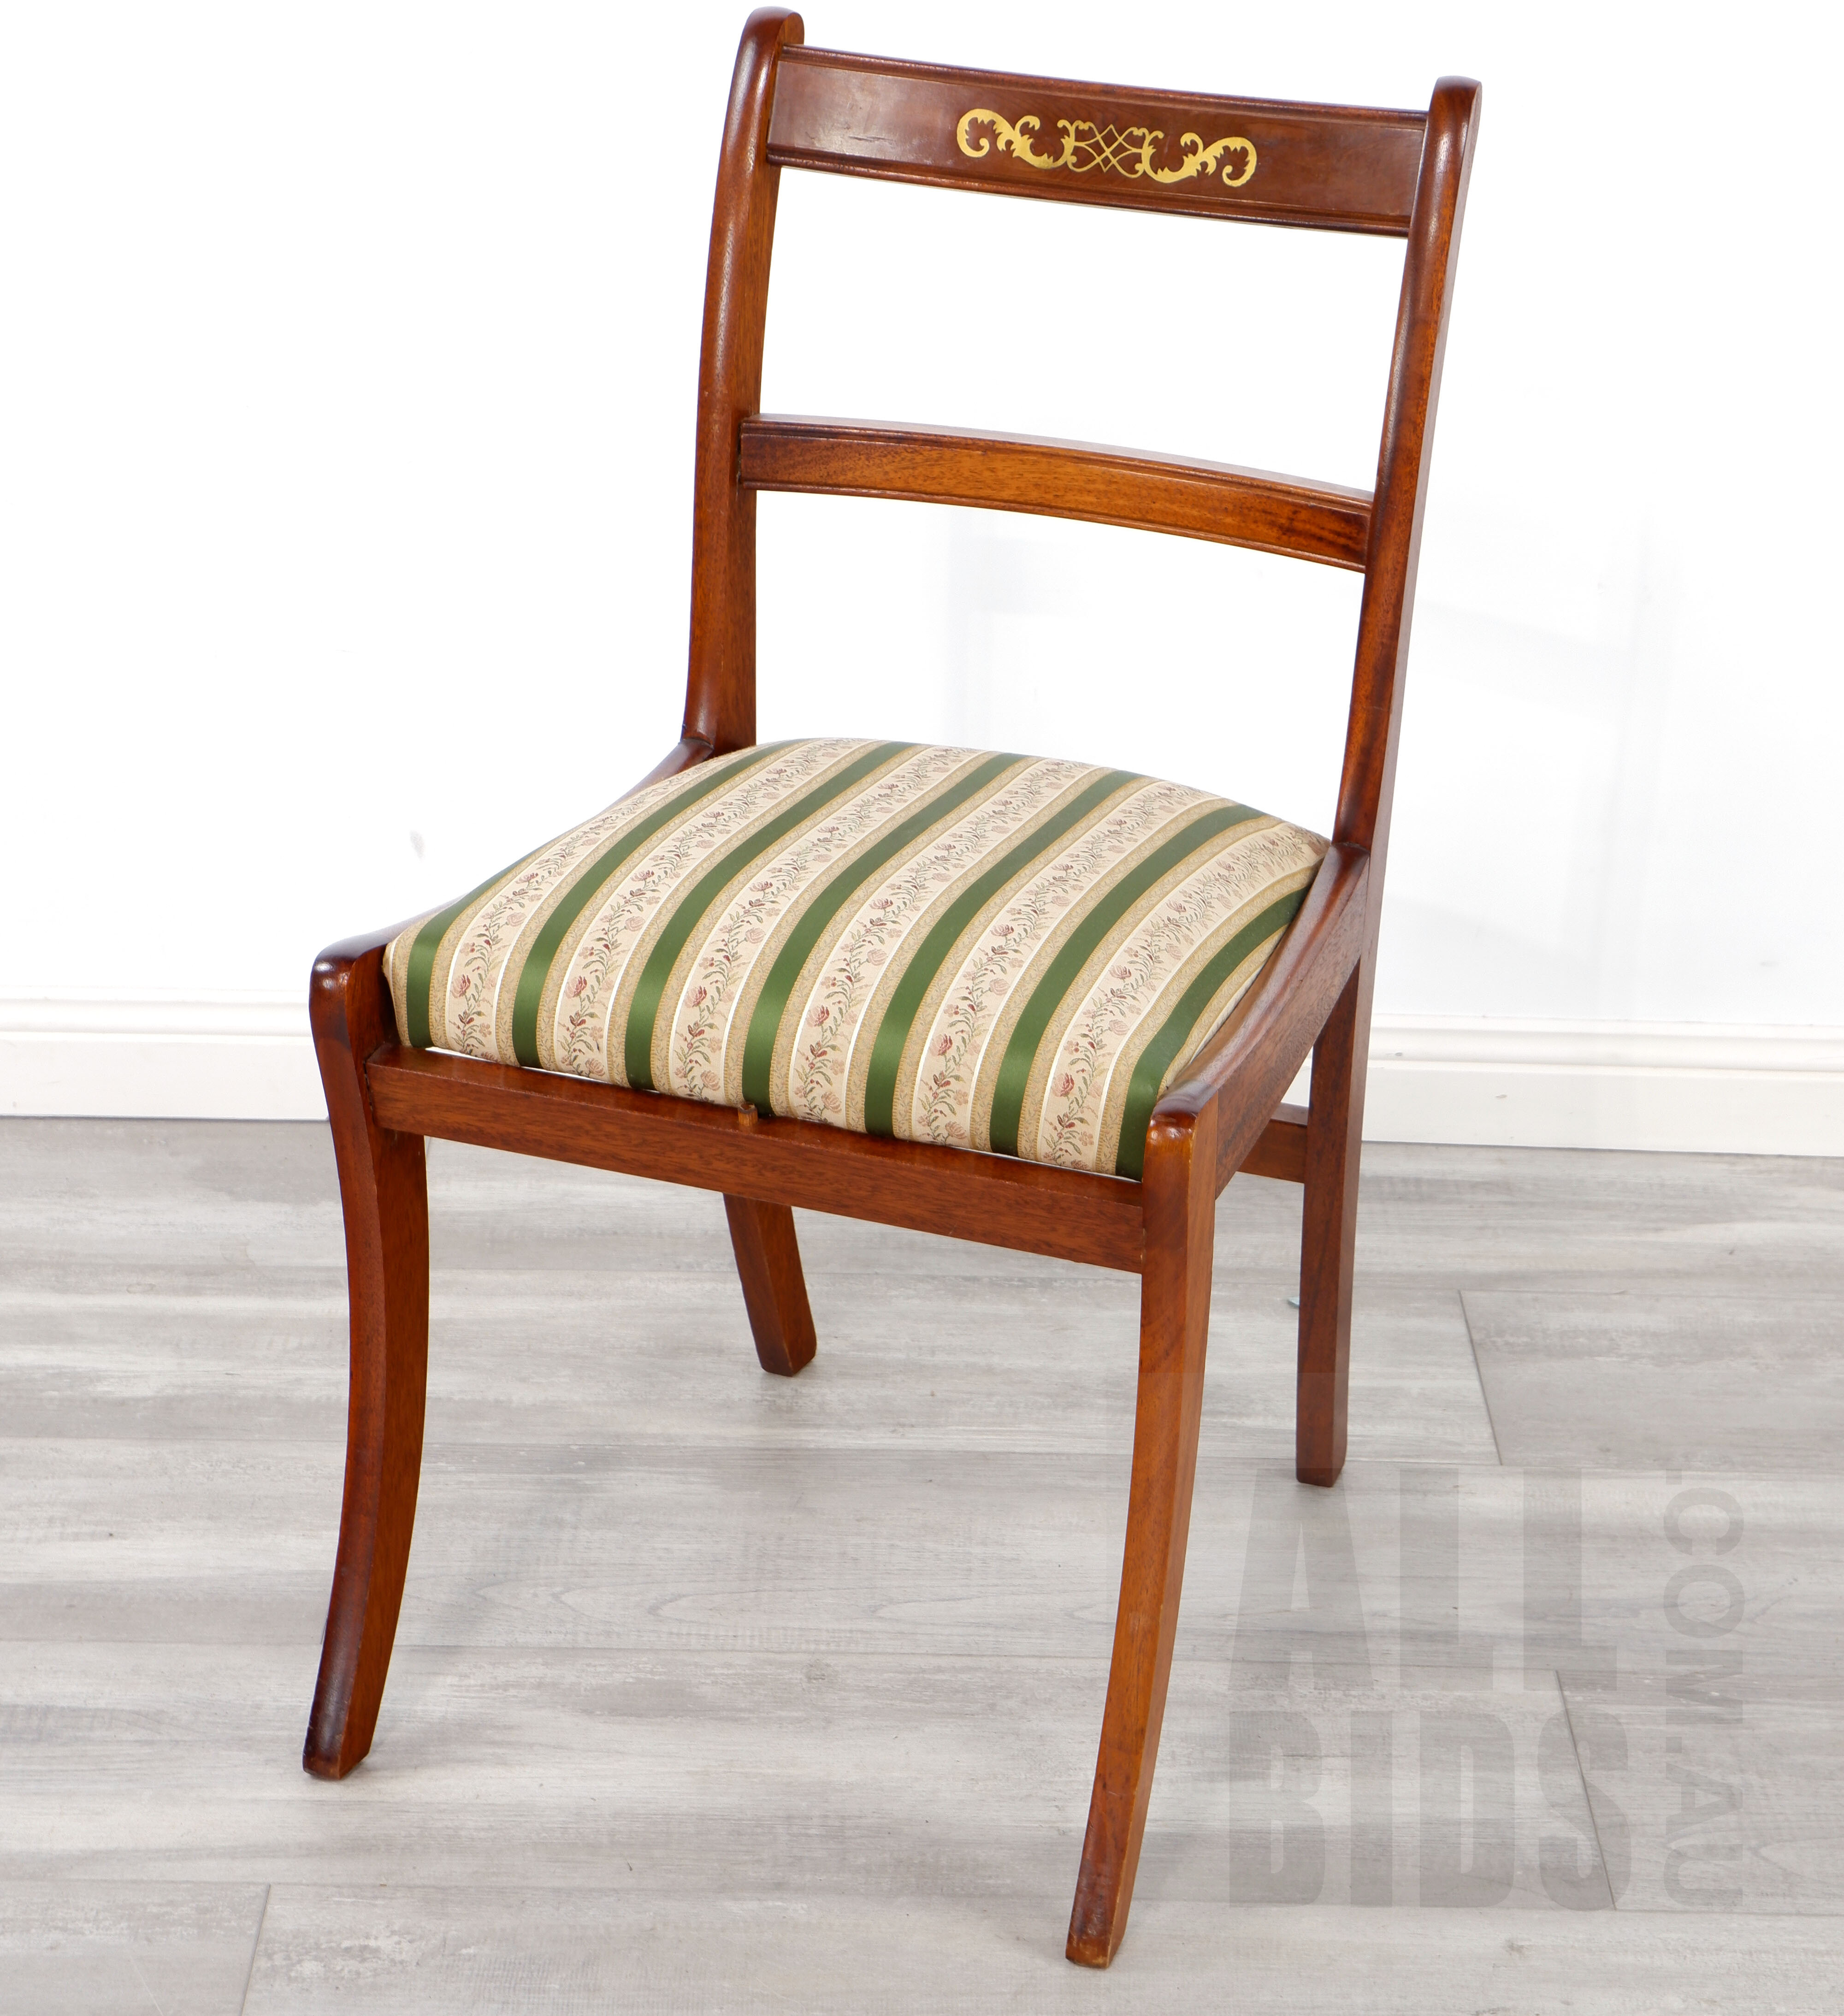 'Regency Style Sabre Leg Dining Chair with Inlaid Brass Scroll and Drop in Seat Cushion'